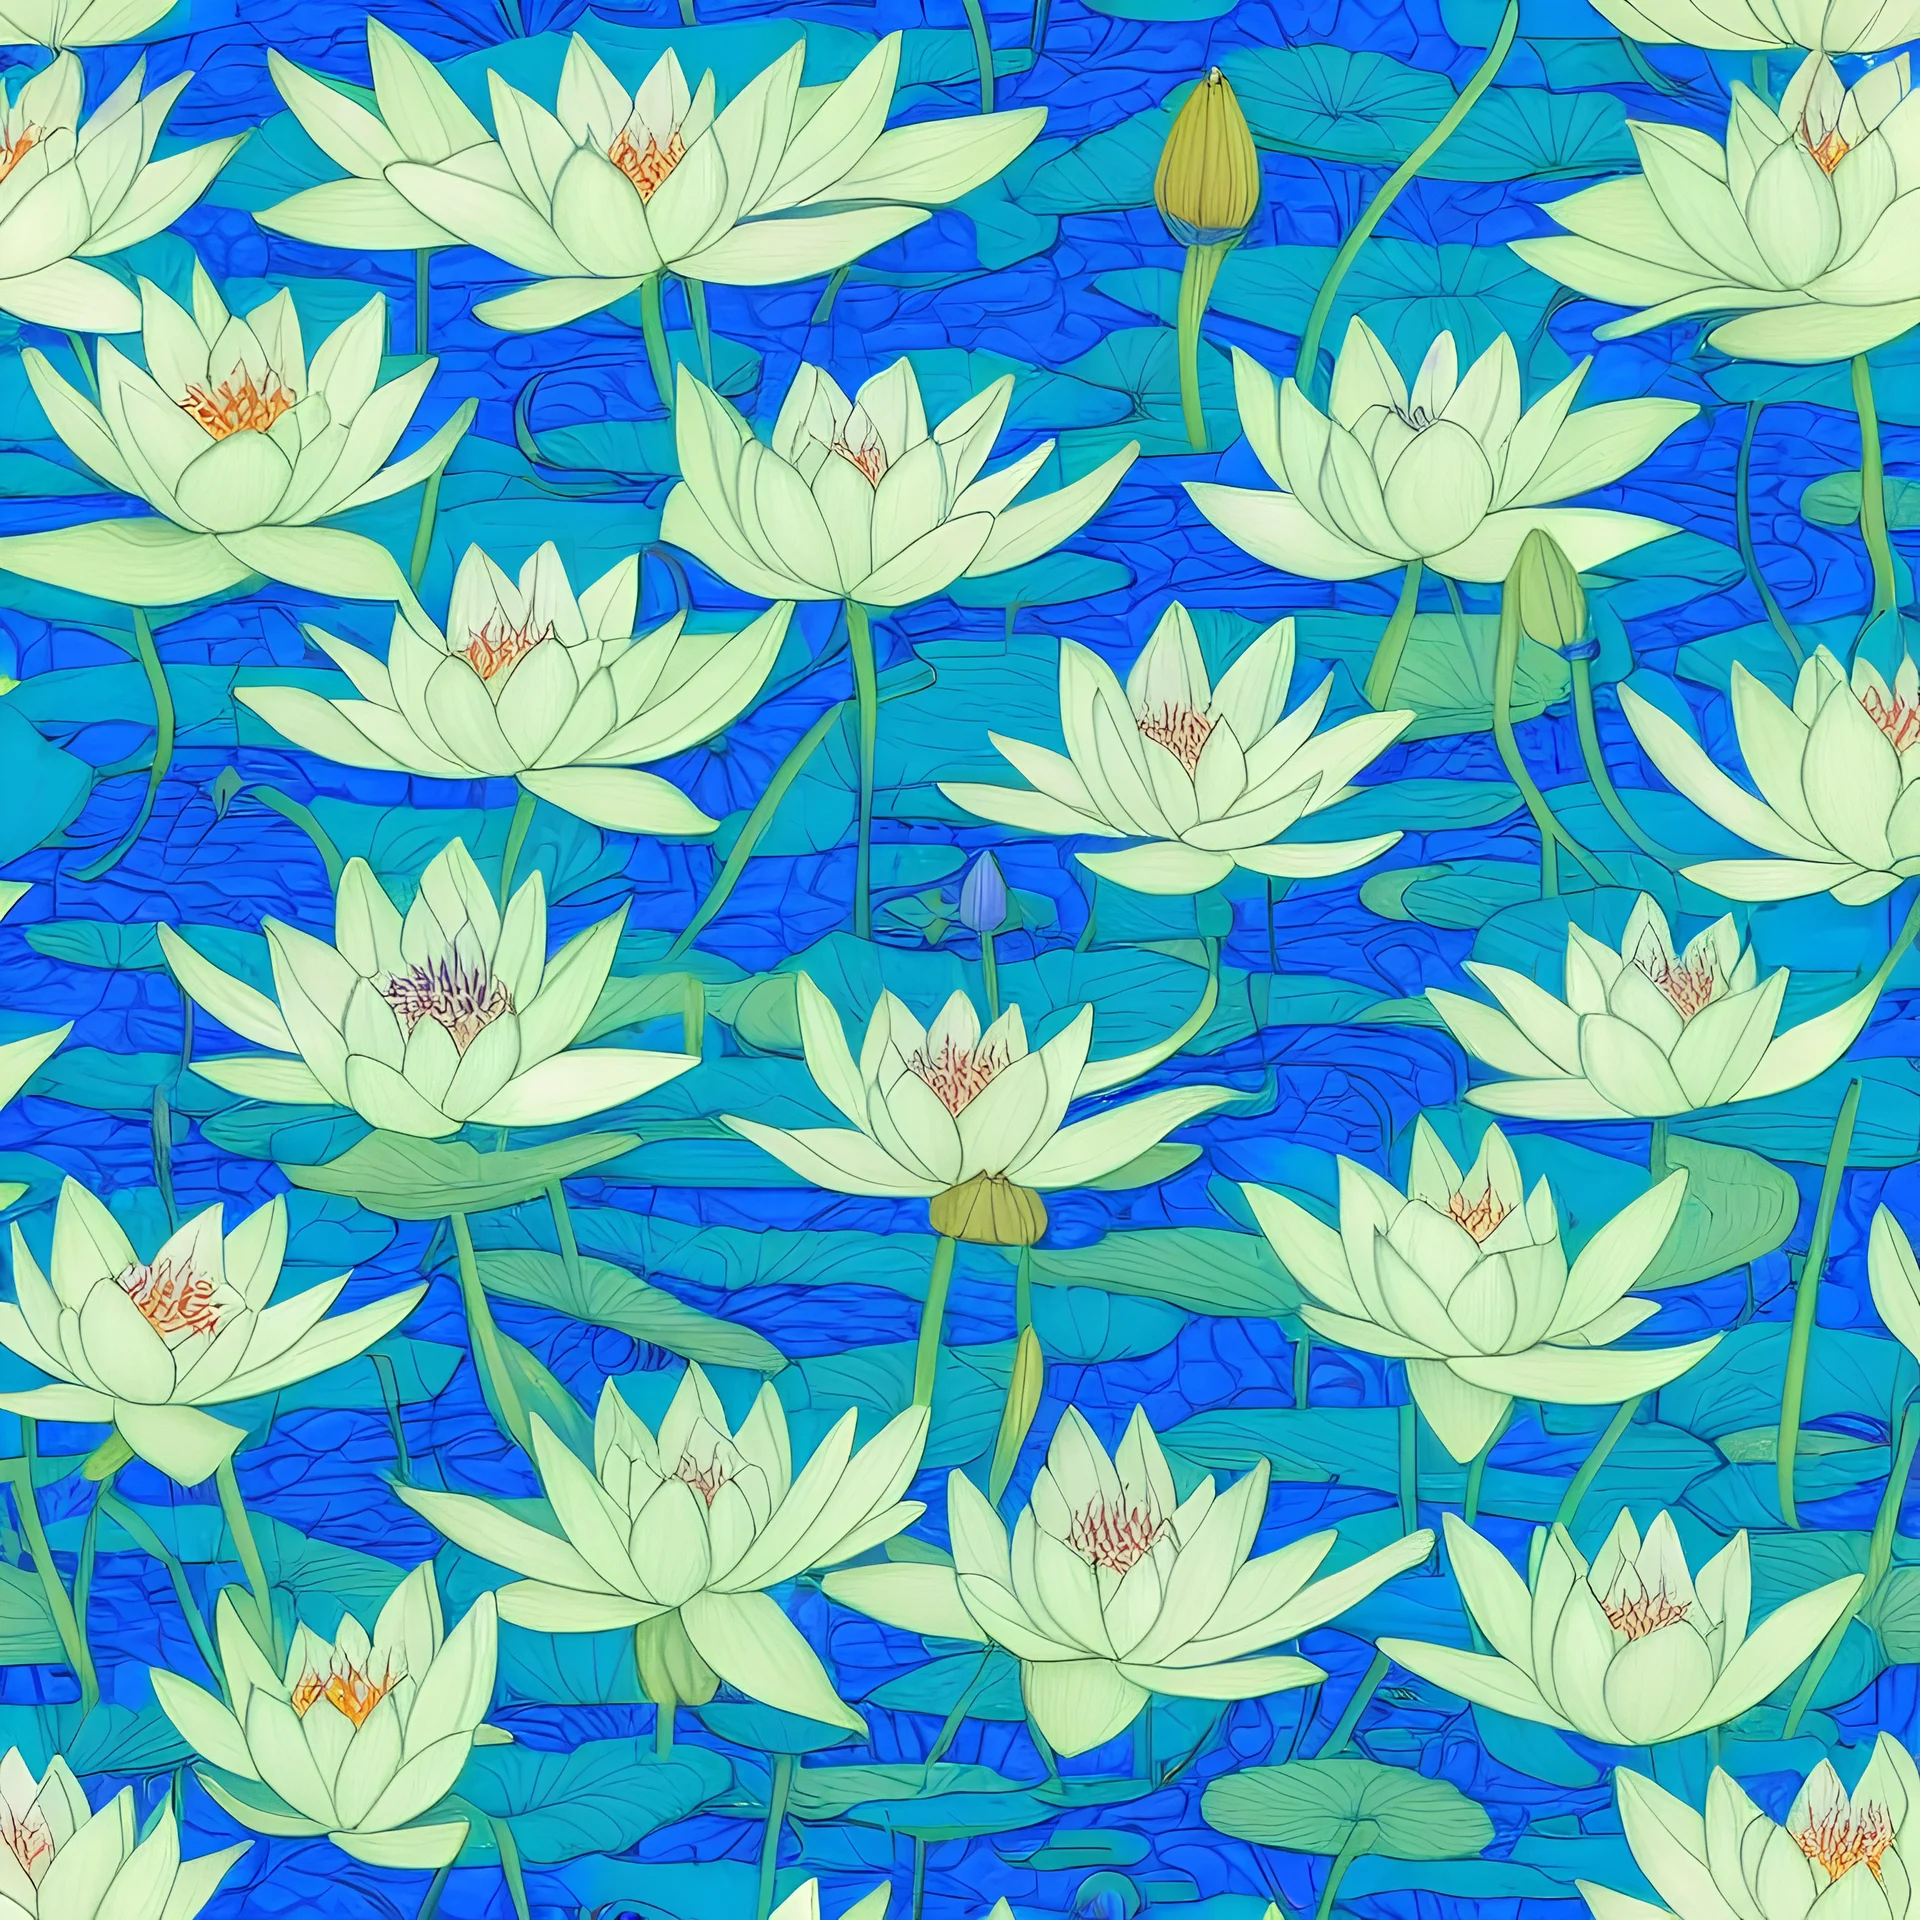 Wall Mural Blue lotus on spring background 